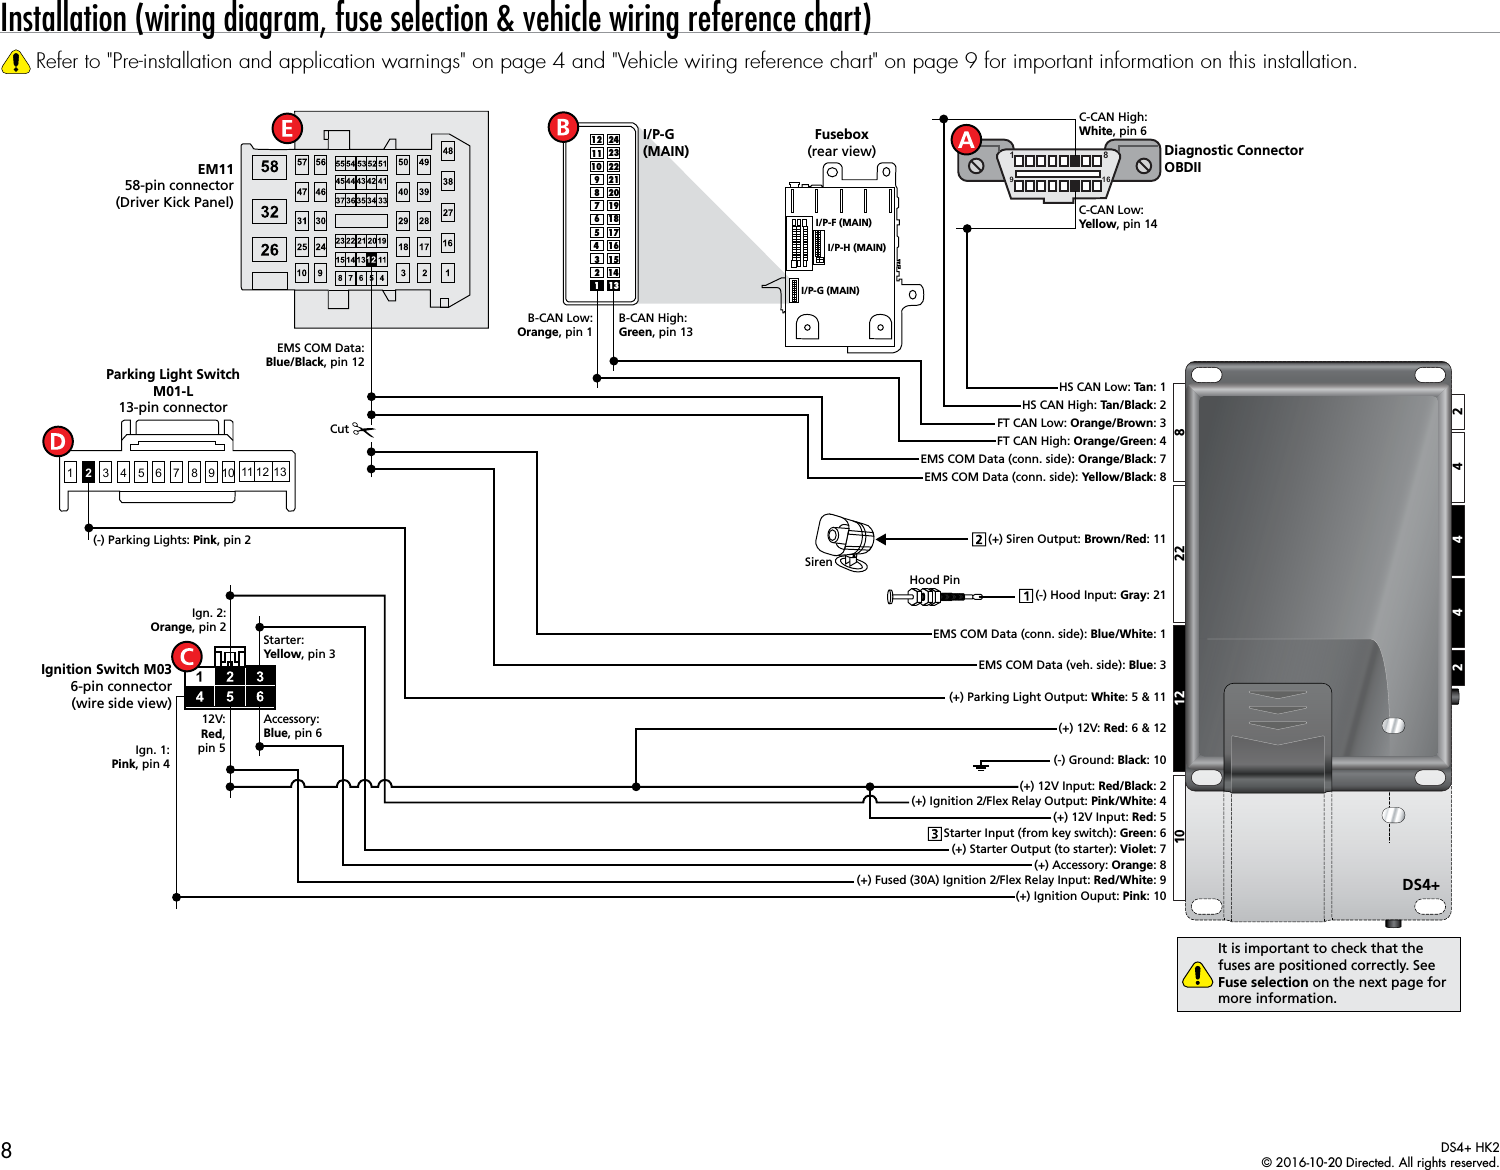 8DS4+ HK2© 2016-10-20 Directed. All rights reserved.Installation (wiring diagram, fuse selection &amp; vehicle wiring reference chart)Refer to &quot;Pre-installation and application warnings&quot; on page 4 and &quot;Vehicle wiring reference chart&quot; on page 9 for important information on this installation.DS4+DS422 810 124 2442EMS COM Data (conn. side): Blue/White: 1EMS COM Data (veh. side): Blue: 3(-) Ground: Black: 10(+) Parking Light Output: White: 5 &amp; 11HS CAN Low: Tan : 1HS CAN High: Tan/Black: 2FT CAN High: Orange/Green: 4FT CAN Low: Orange/Brown: 3EMS COM Data (conn. side): Yellow/Black: 8EMS COM Data (conn. side): Orange/Black: 7SirenHood Pin(+) 12V: Red: 6 &amp; 12(+) Ignition Ouput: Pink: 10(+) 12V Input: Red: 5(+) Ignition 2/Flex Relay Output: Pink/White: 4(+) Fused (30A) Ignition 2/Flex Relay Input: Red/White: 9(+) Accessory: Orange: 8(+) 12V Input: Red/Black: 2(+) Starter Output (to starter): Violet: 7(-) Hood Input: Gray: 21(+) Siren Output: Brown/Red: 11Starter Input (from key switch): Green: 6It is important to check that the fuses are positioned correctly. See Fuse selection on the next page for more information.CutDiagnostic ConnectorOBDIIIgnition Switch M036-pin connector(wire side view)Ign. 2:Orange, pin 2Ign. 1:Pink, pin 412V:Red,pin 5Starter:Yellow, pin 3Accessory:Blue, pin 6B-CAN High: Green, pin 13B-CAN Low: Orange, pin 1EMS COM Data:Blue/Black, pin 12(-) Parking Lights: Pink, pin 2Parking Light SwitchM01-L13-pin connectorI/P-G(MAIN)EM1158-pin connector(Driver Kick Panel) C-CAN Low:Yellow, pin 14C-CAN High:White, pin 6Fusebox(rear view)13 4 5 6 7 8 9 10 1311 122I/P-G (MAIN)I/P-H (MAIN)I/P-F (MAIN)1211221023242192081971861751641531421311 8169